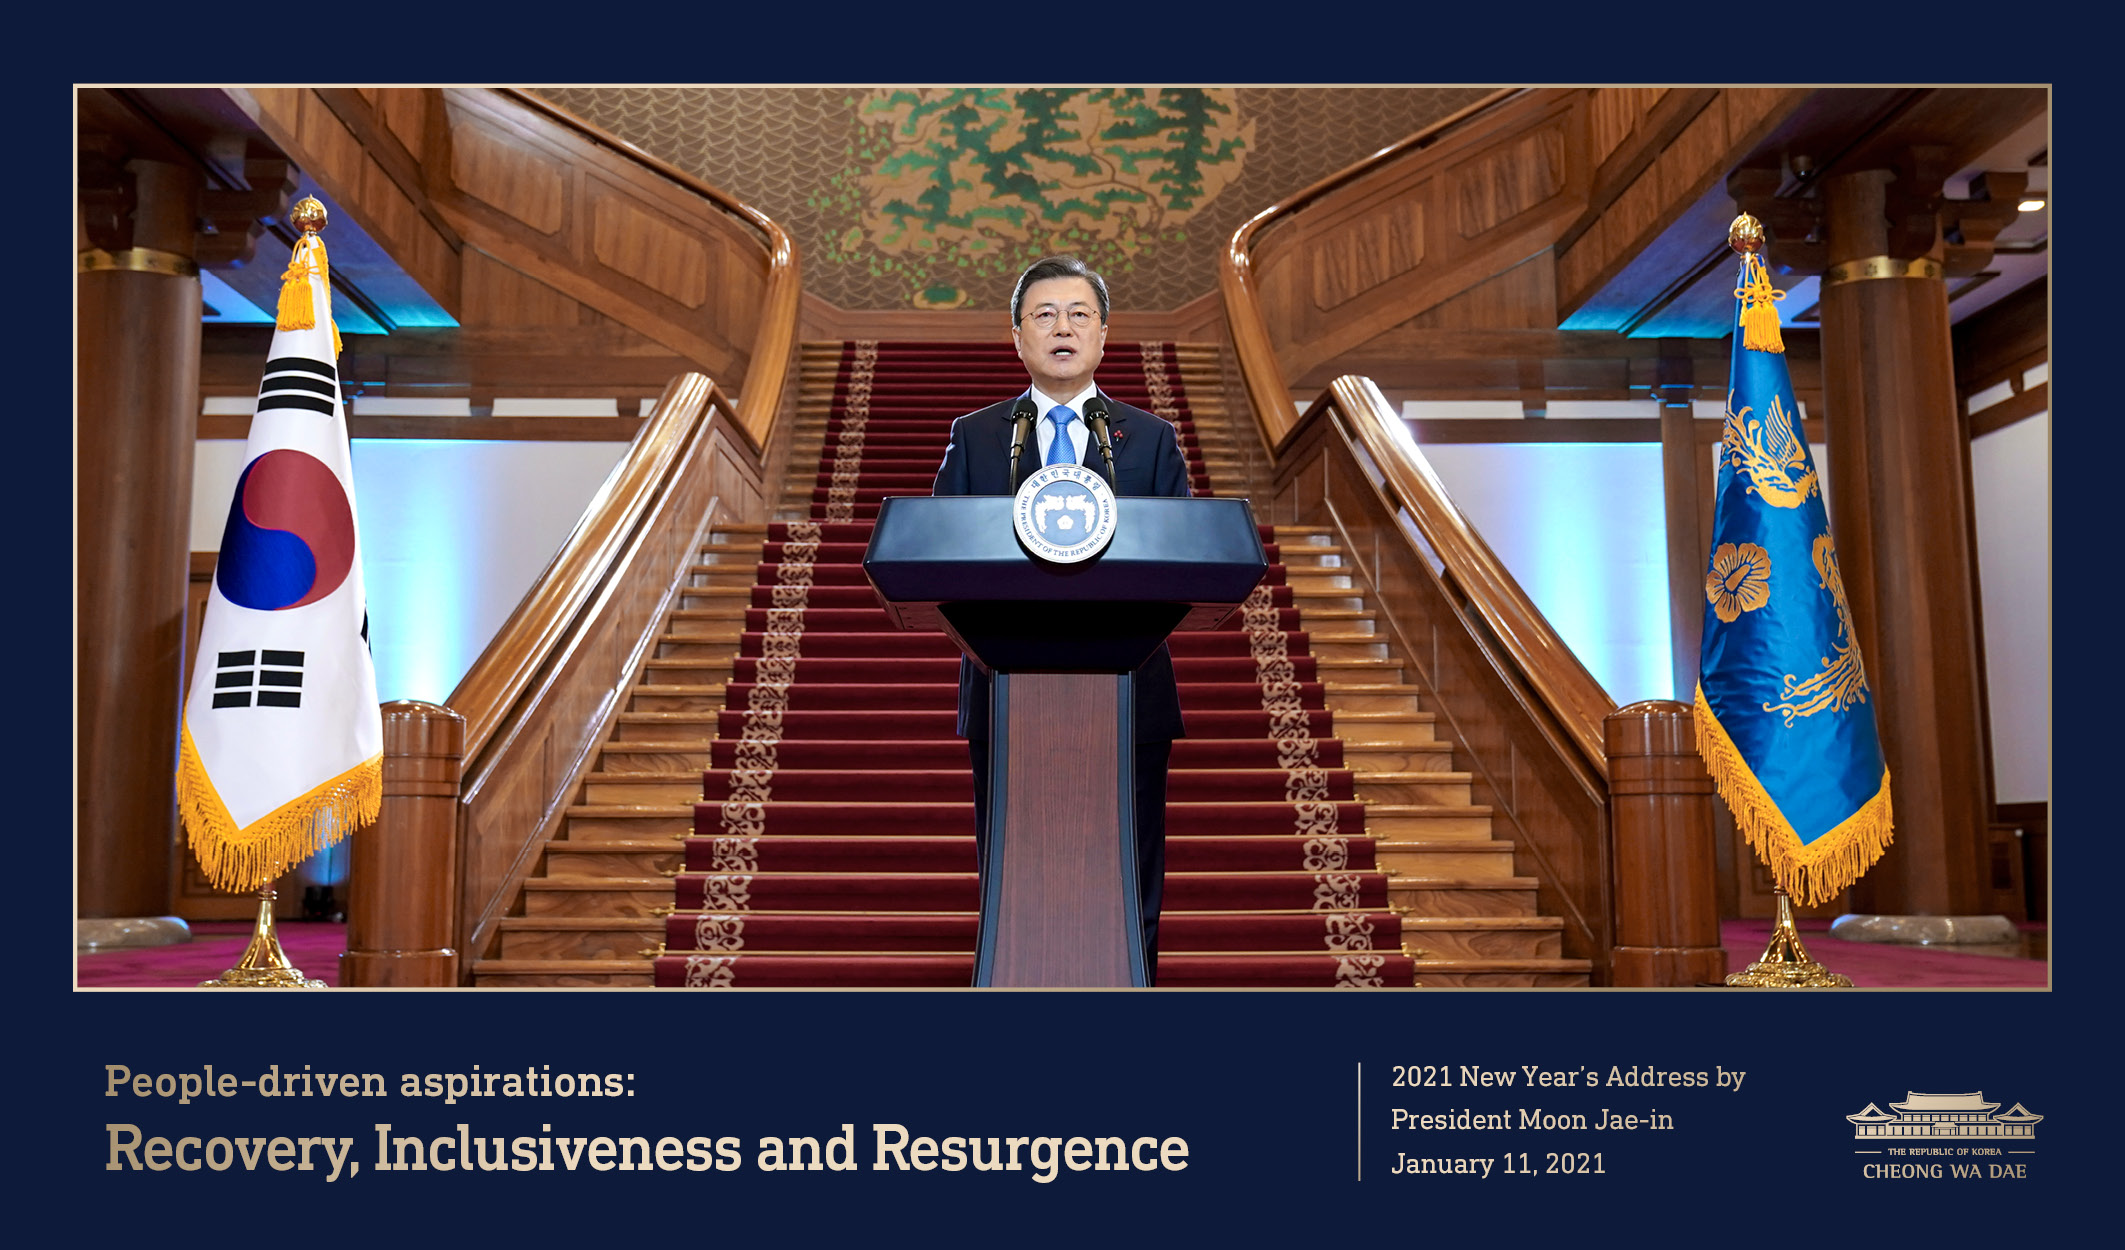 2021 New Year’s Address by President Moon Jae-in